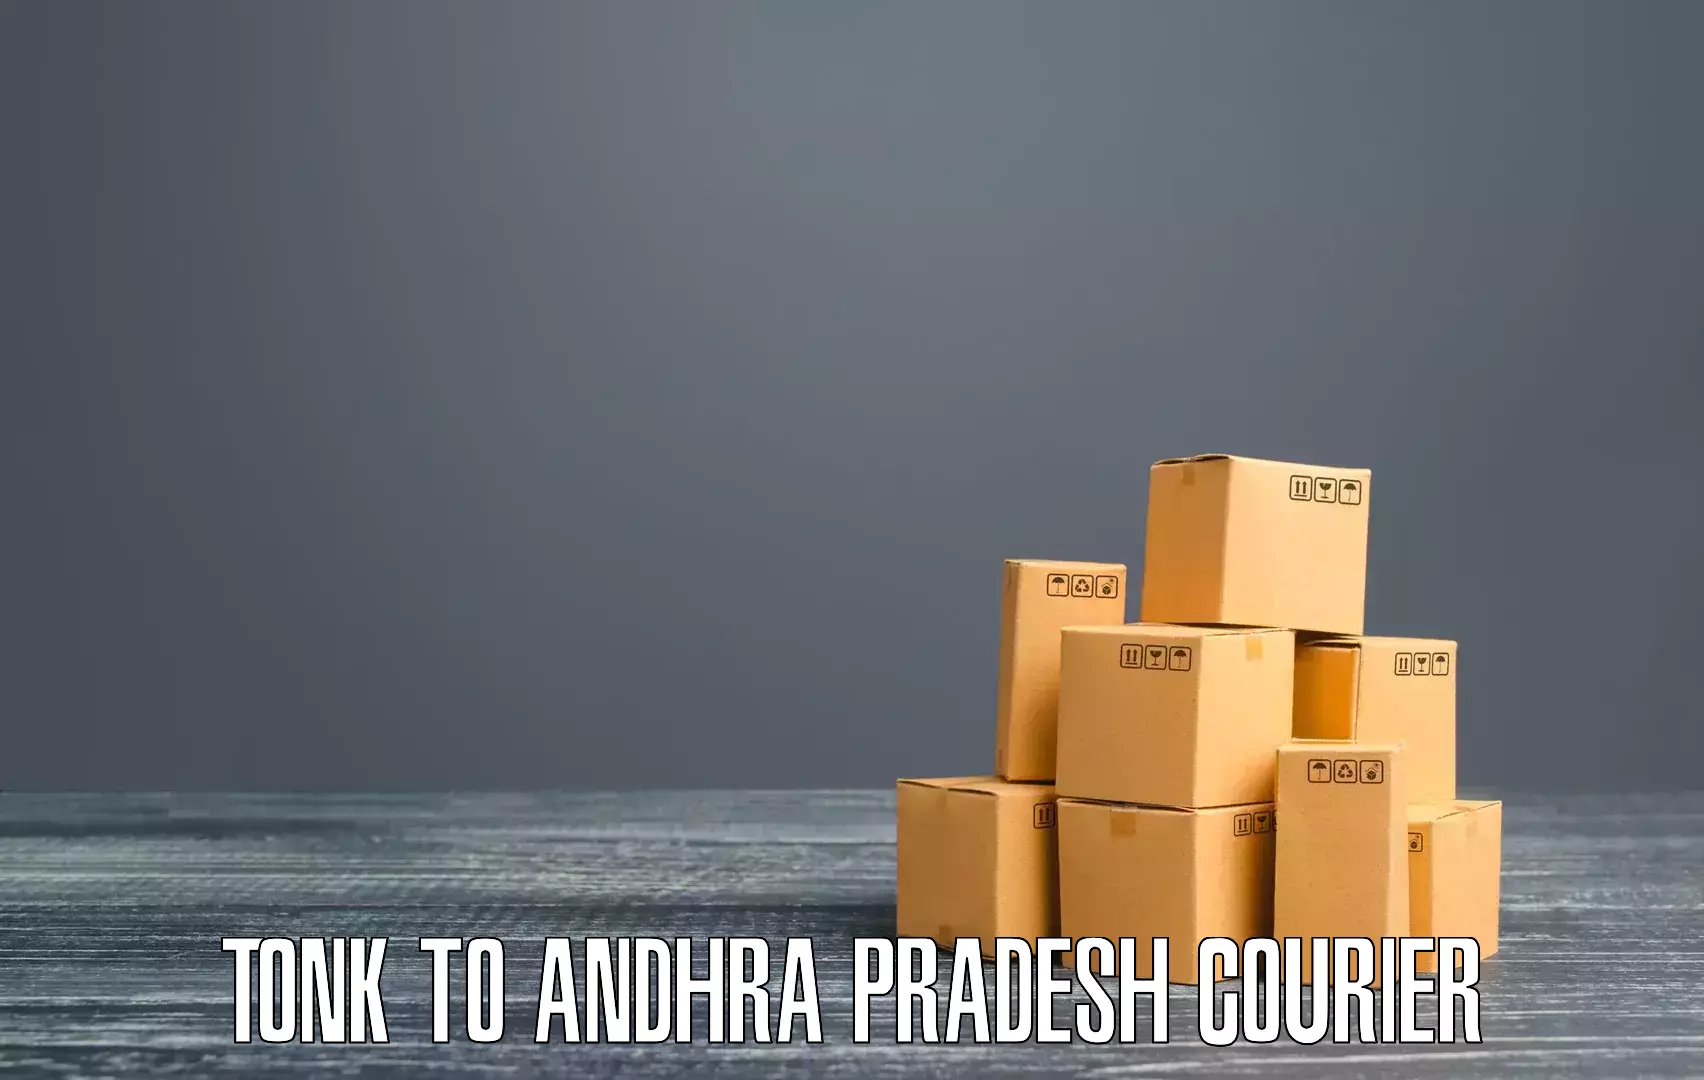 Reliable parcel services Tonk to Andhra Pradesh